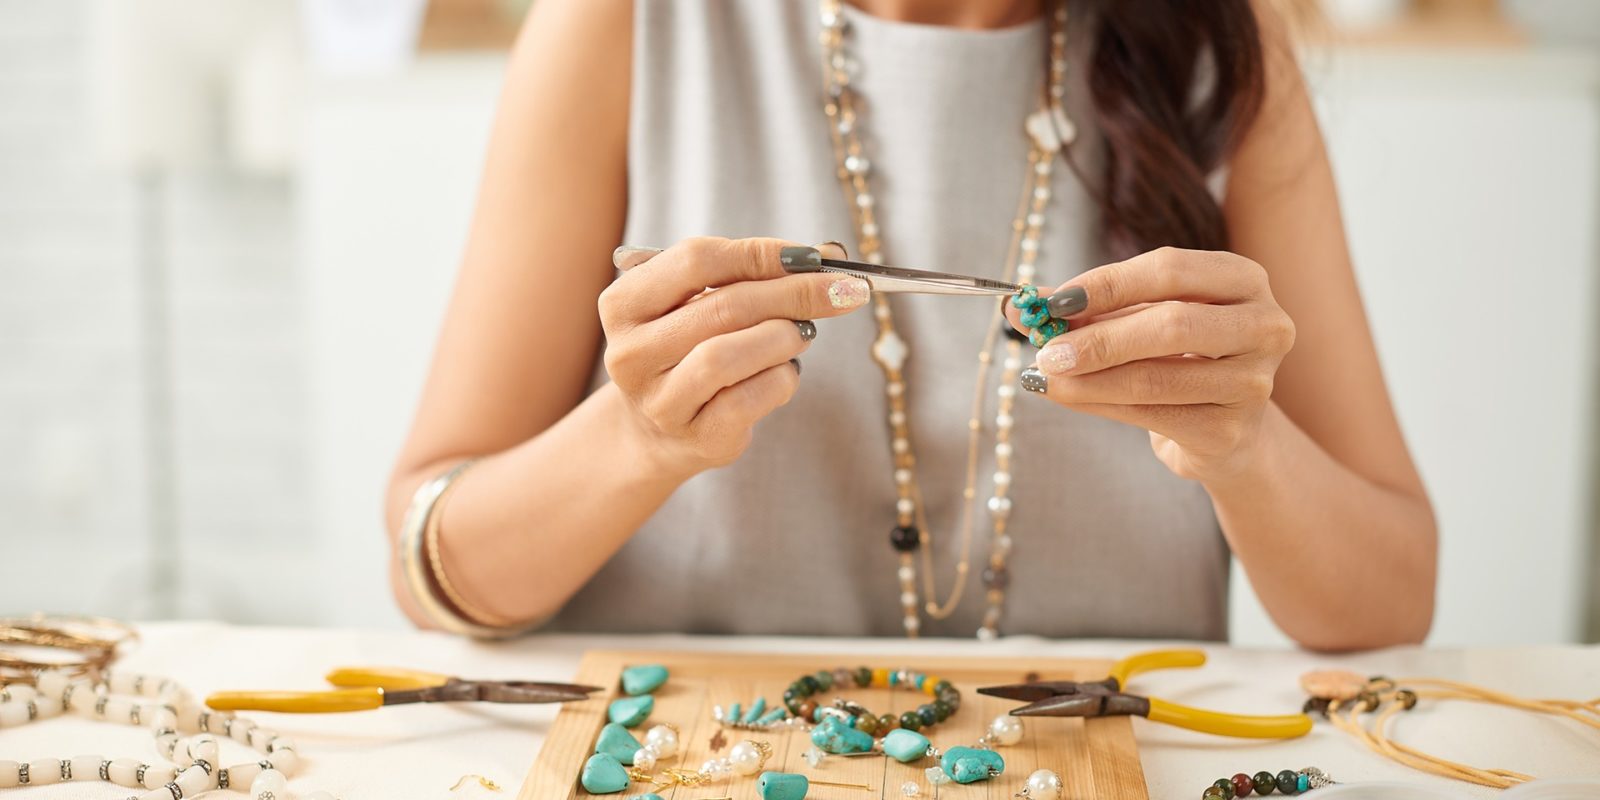 woman in gray tank top and golden necklaces uses a jewelers tool to assemble jewelery at a workstation